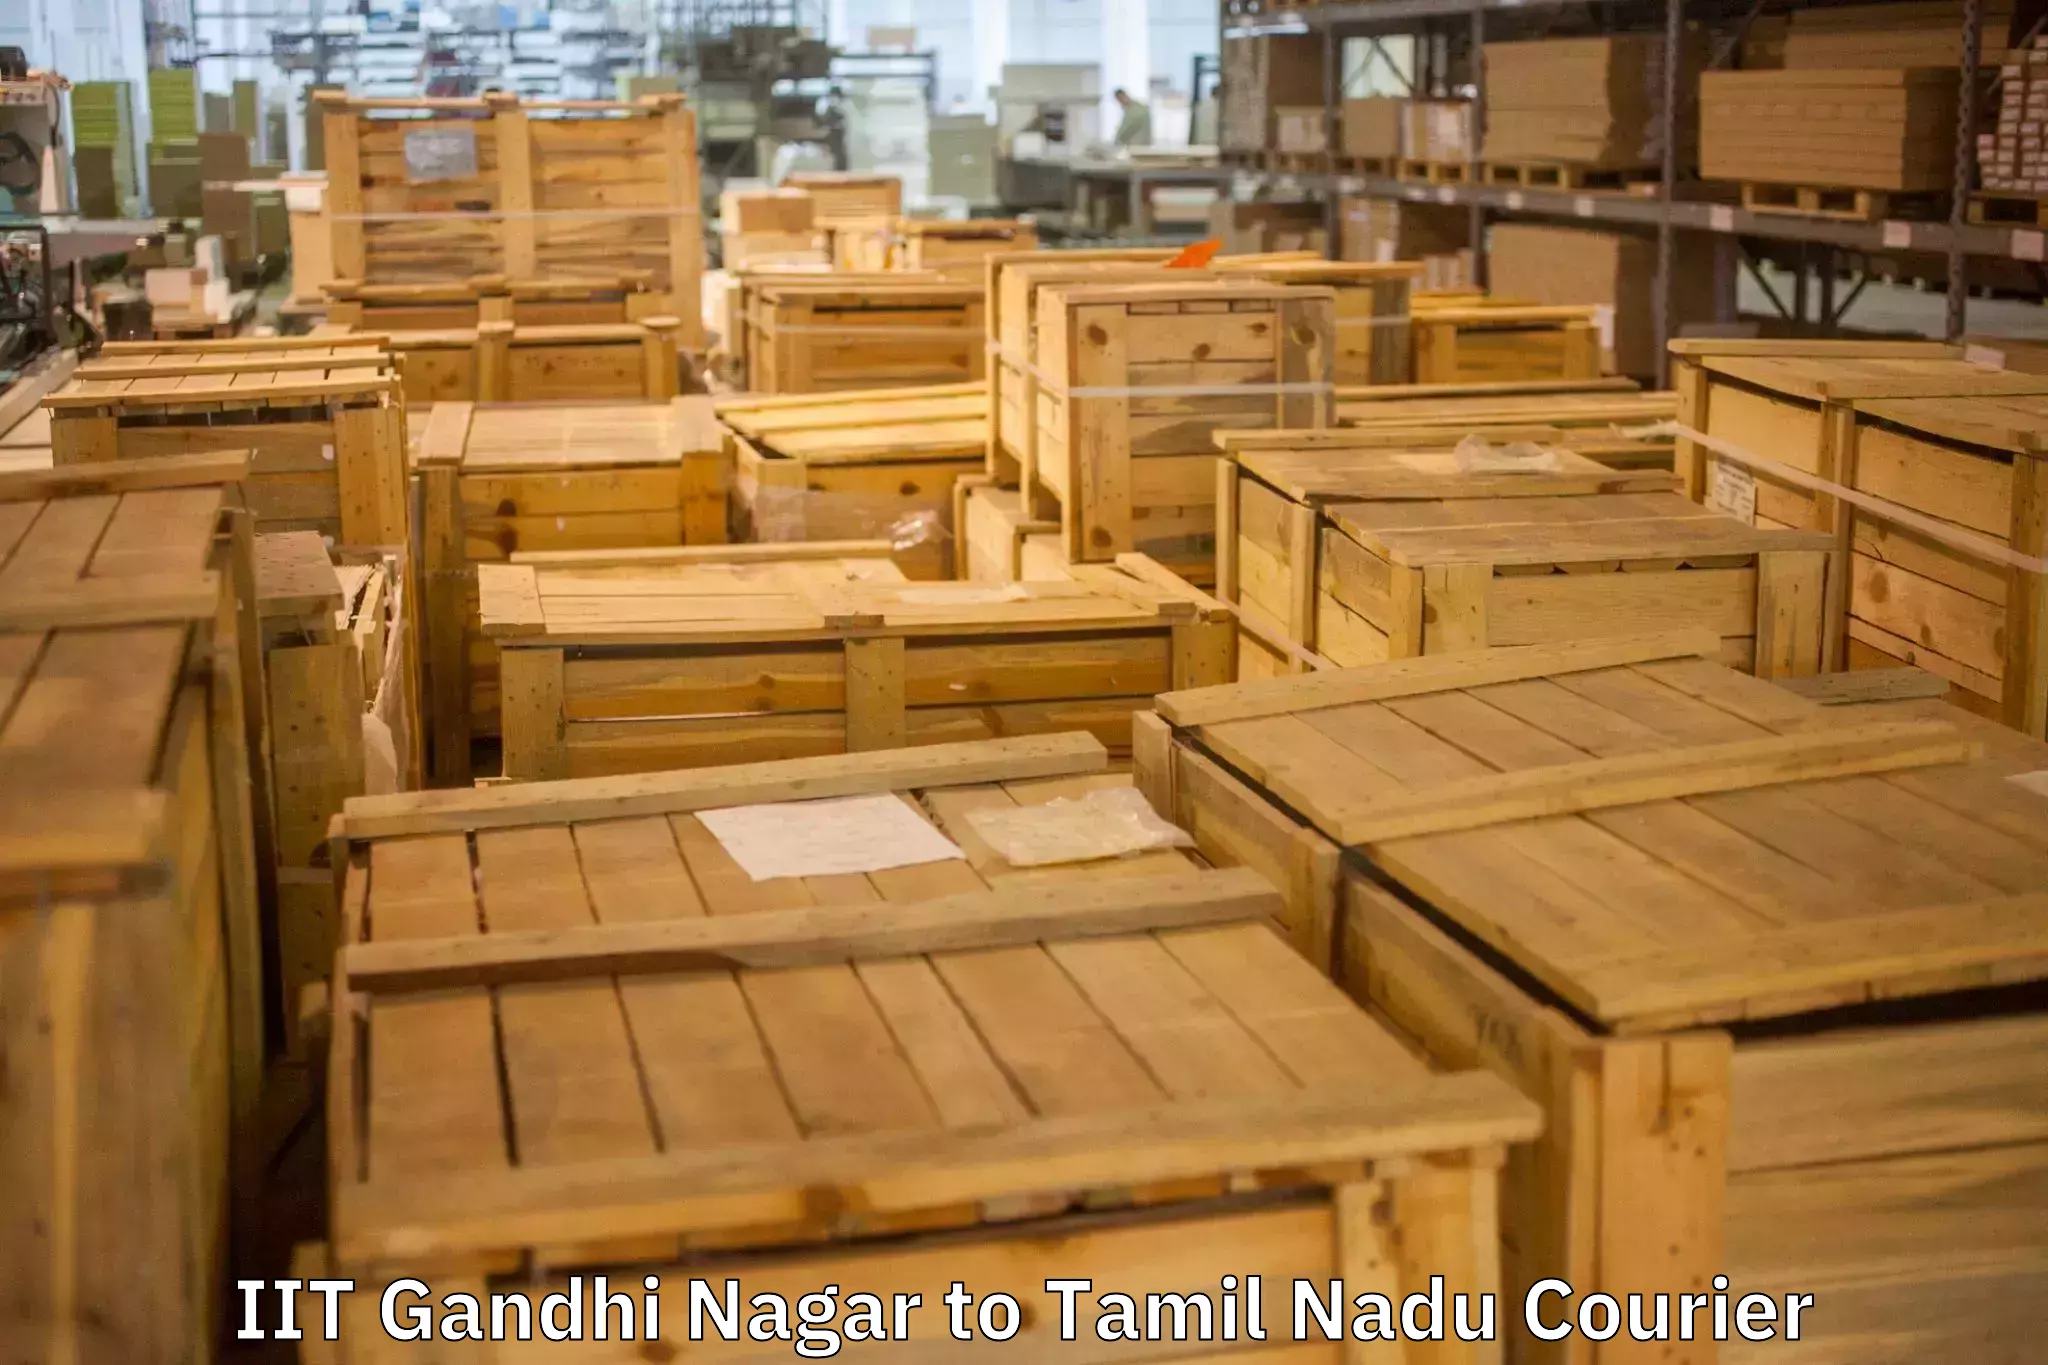 High-quality moving services IIT Gandhi Nagar to Vellore